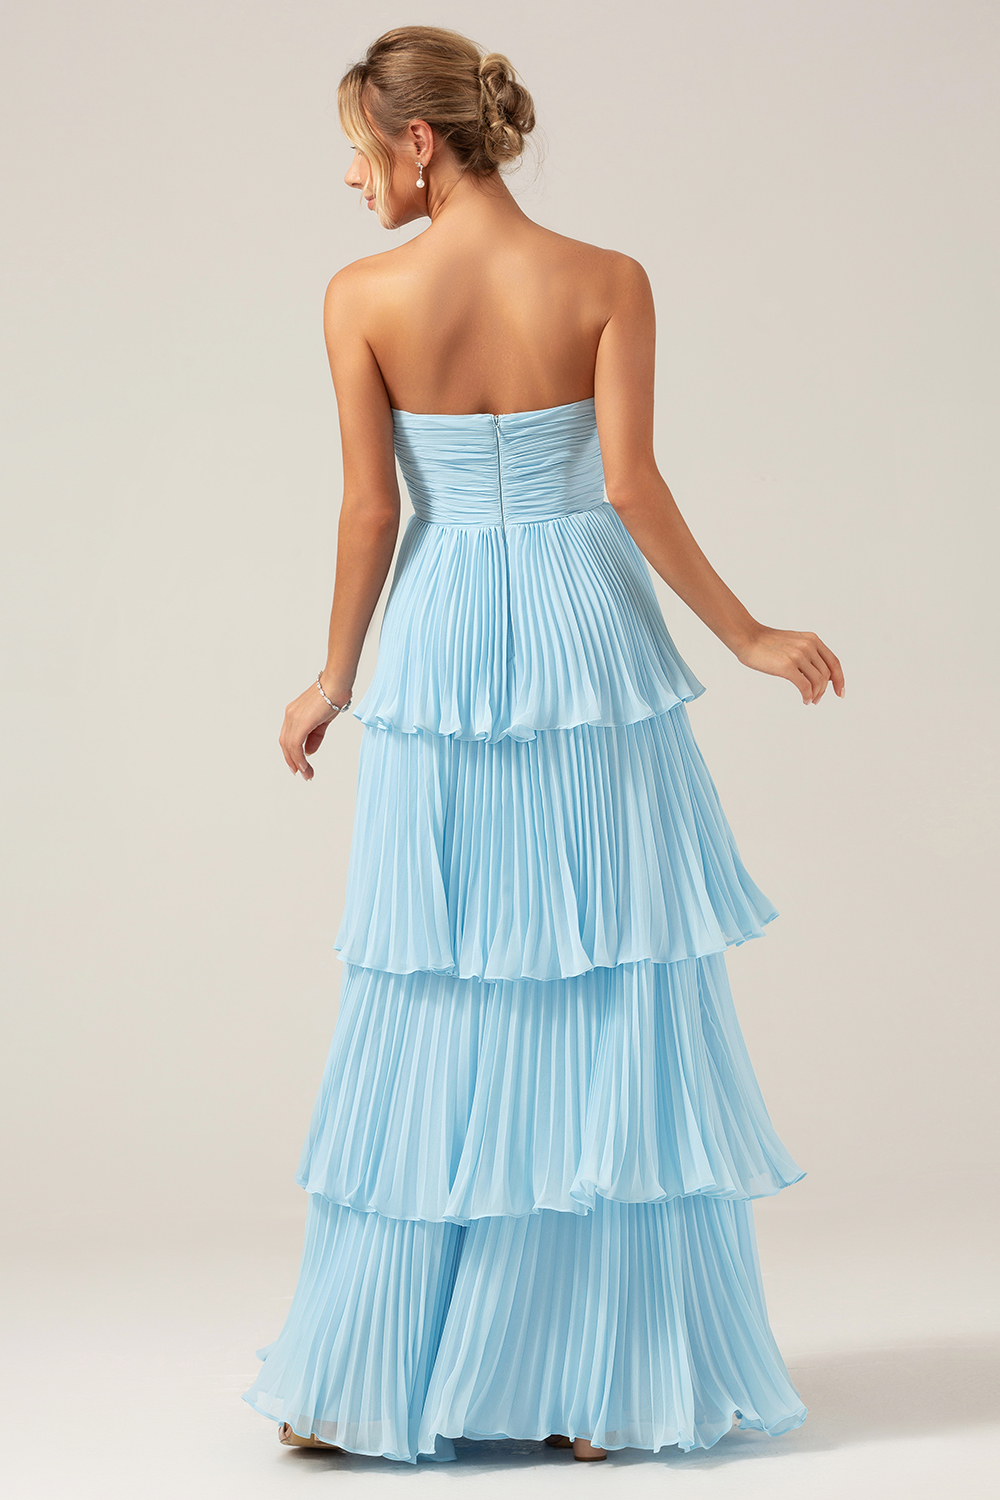 Sky Blue A Line Strapless Pleated Tiered Bridesmaid Dress